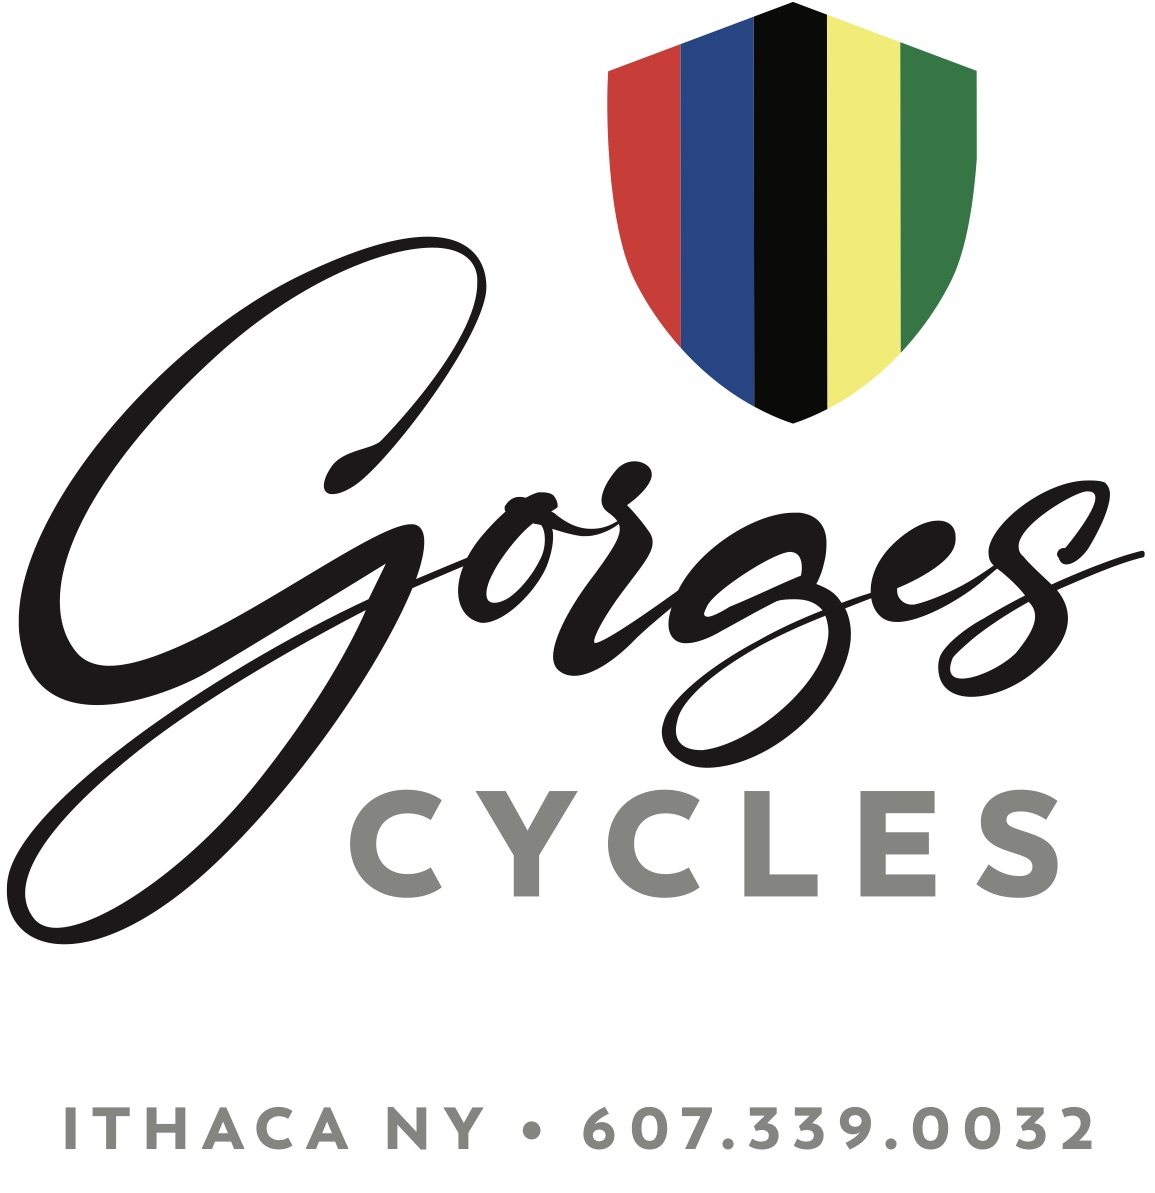 GorgesCycles-Stacked-FullColor-Signs (1) (002)